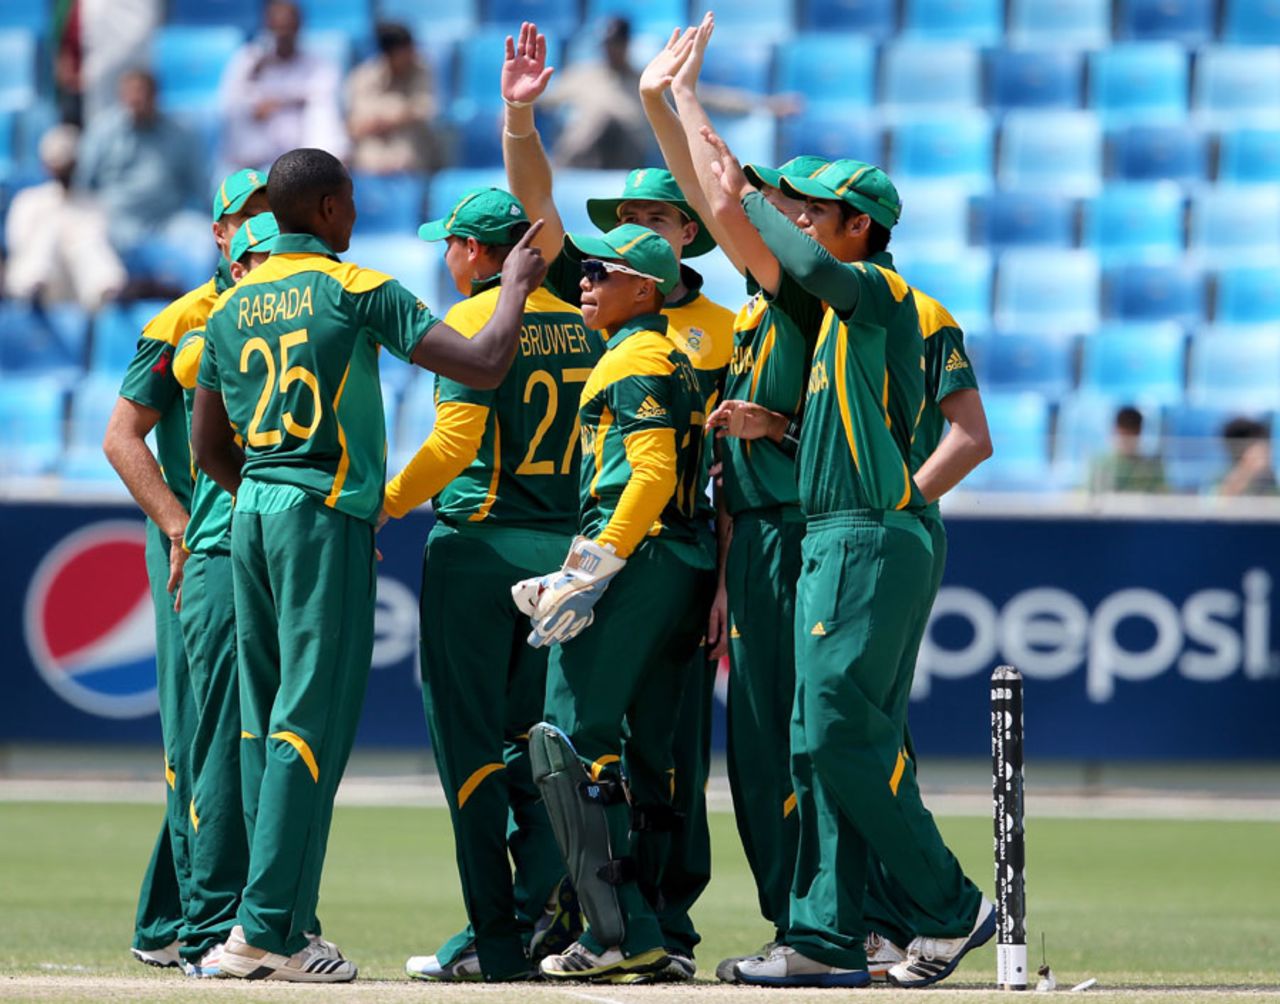 The South Africa players celebrate after a wicket, Pakistan v South Africa, Final, Under-19 World Cup, Dubai, March 1, 2014